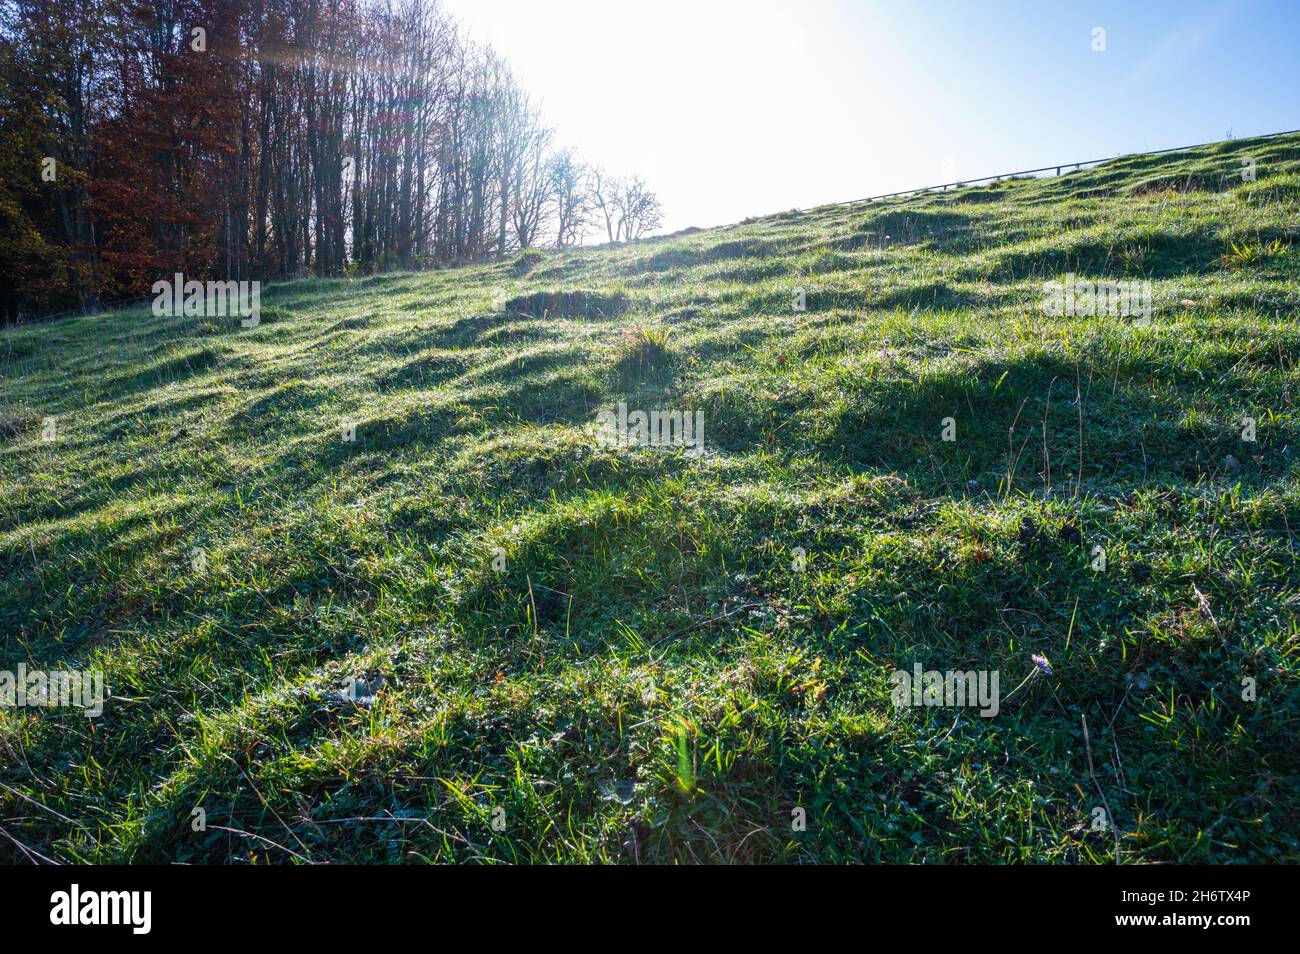 Earth or grass hummocks, undulating ground or grass knolls covered by morning frost and wet dew in Autumn, in a grassy field in the countryside, UK. Stock Photo